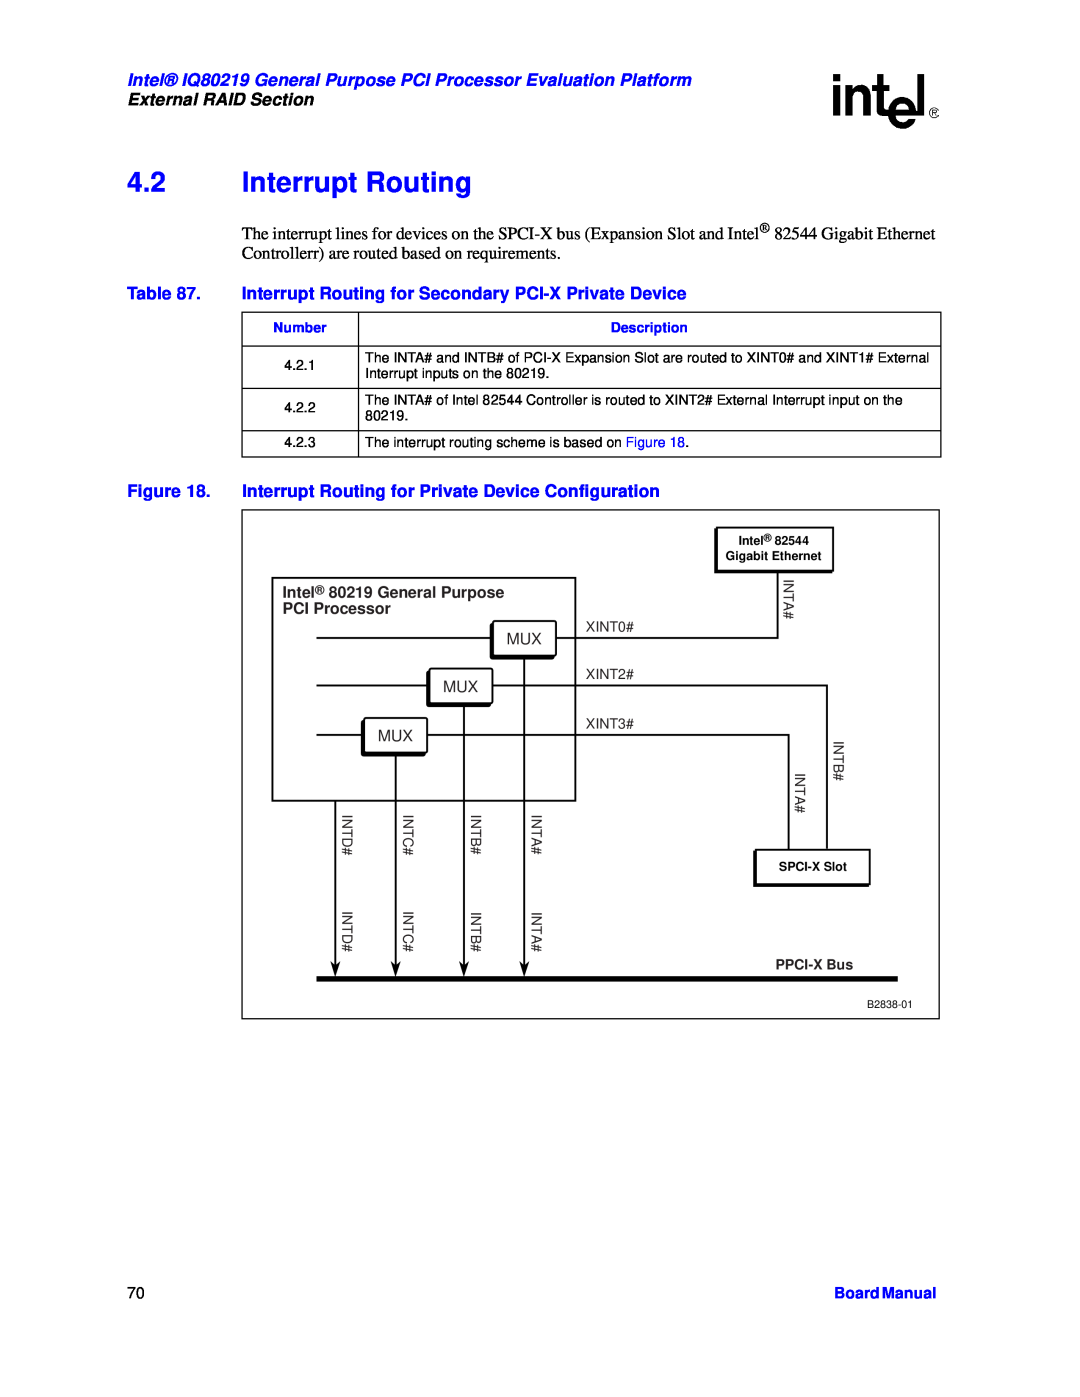 Intel IQ80219 manual External RAID Section, Interrupt Routing for Secondary PCI-X Private Device, Board Manual 